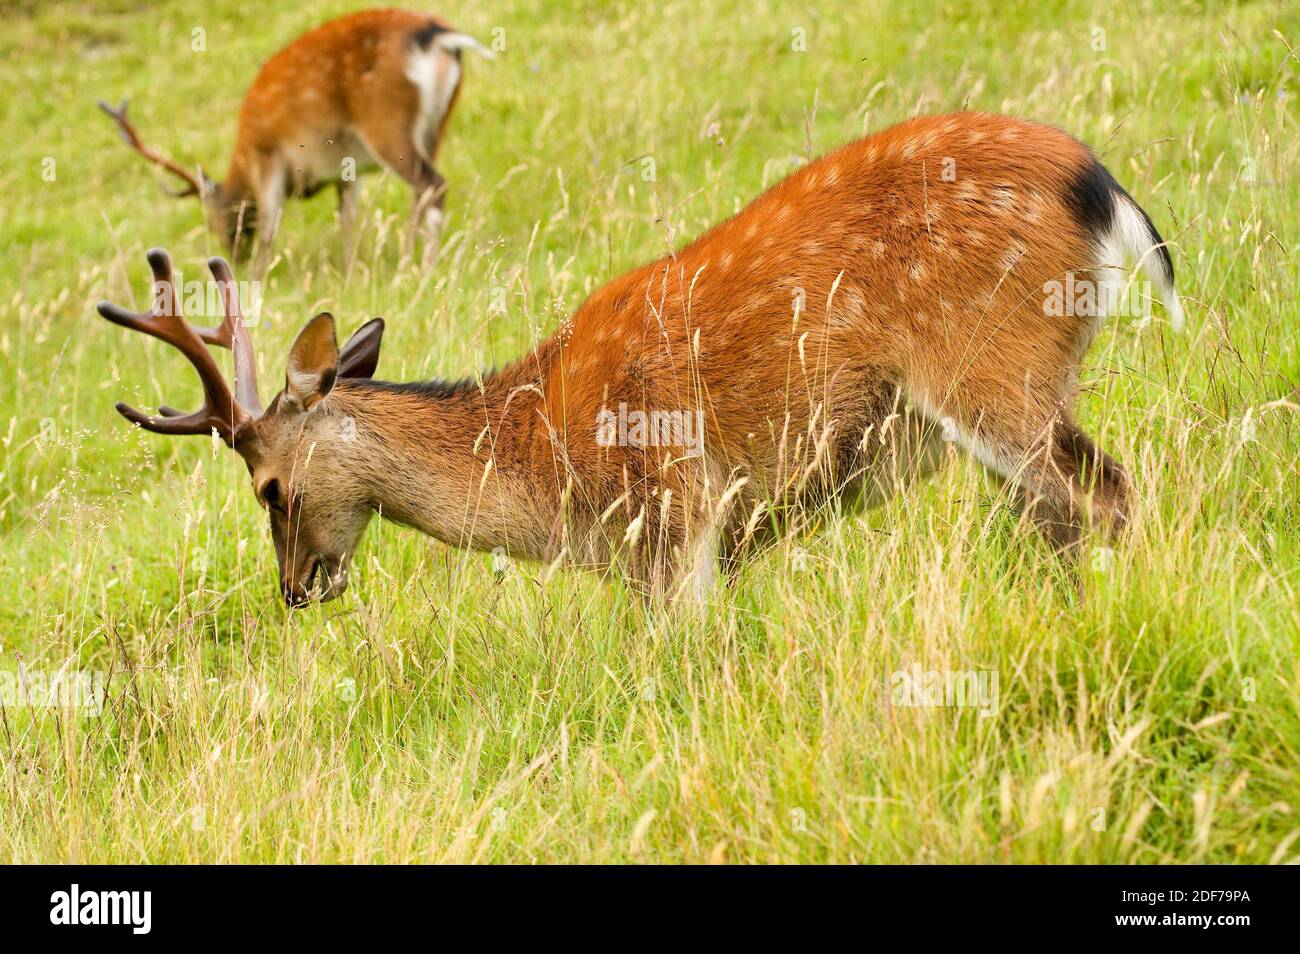 Sika deer or Japanese deer (Cervus nippon) is a deer native to eastern Asia and introduced in other countries. Stock Photo